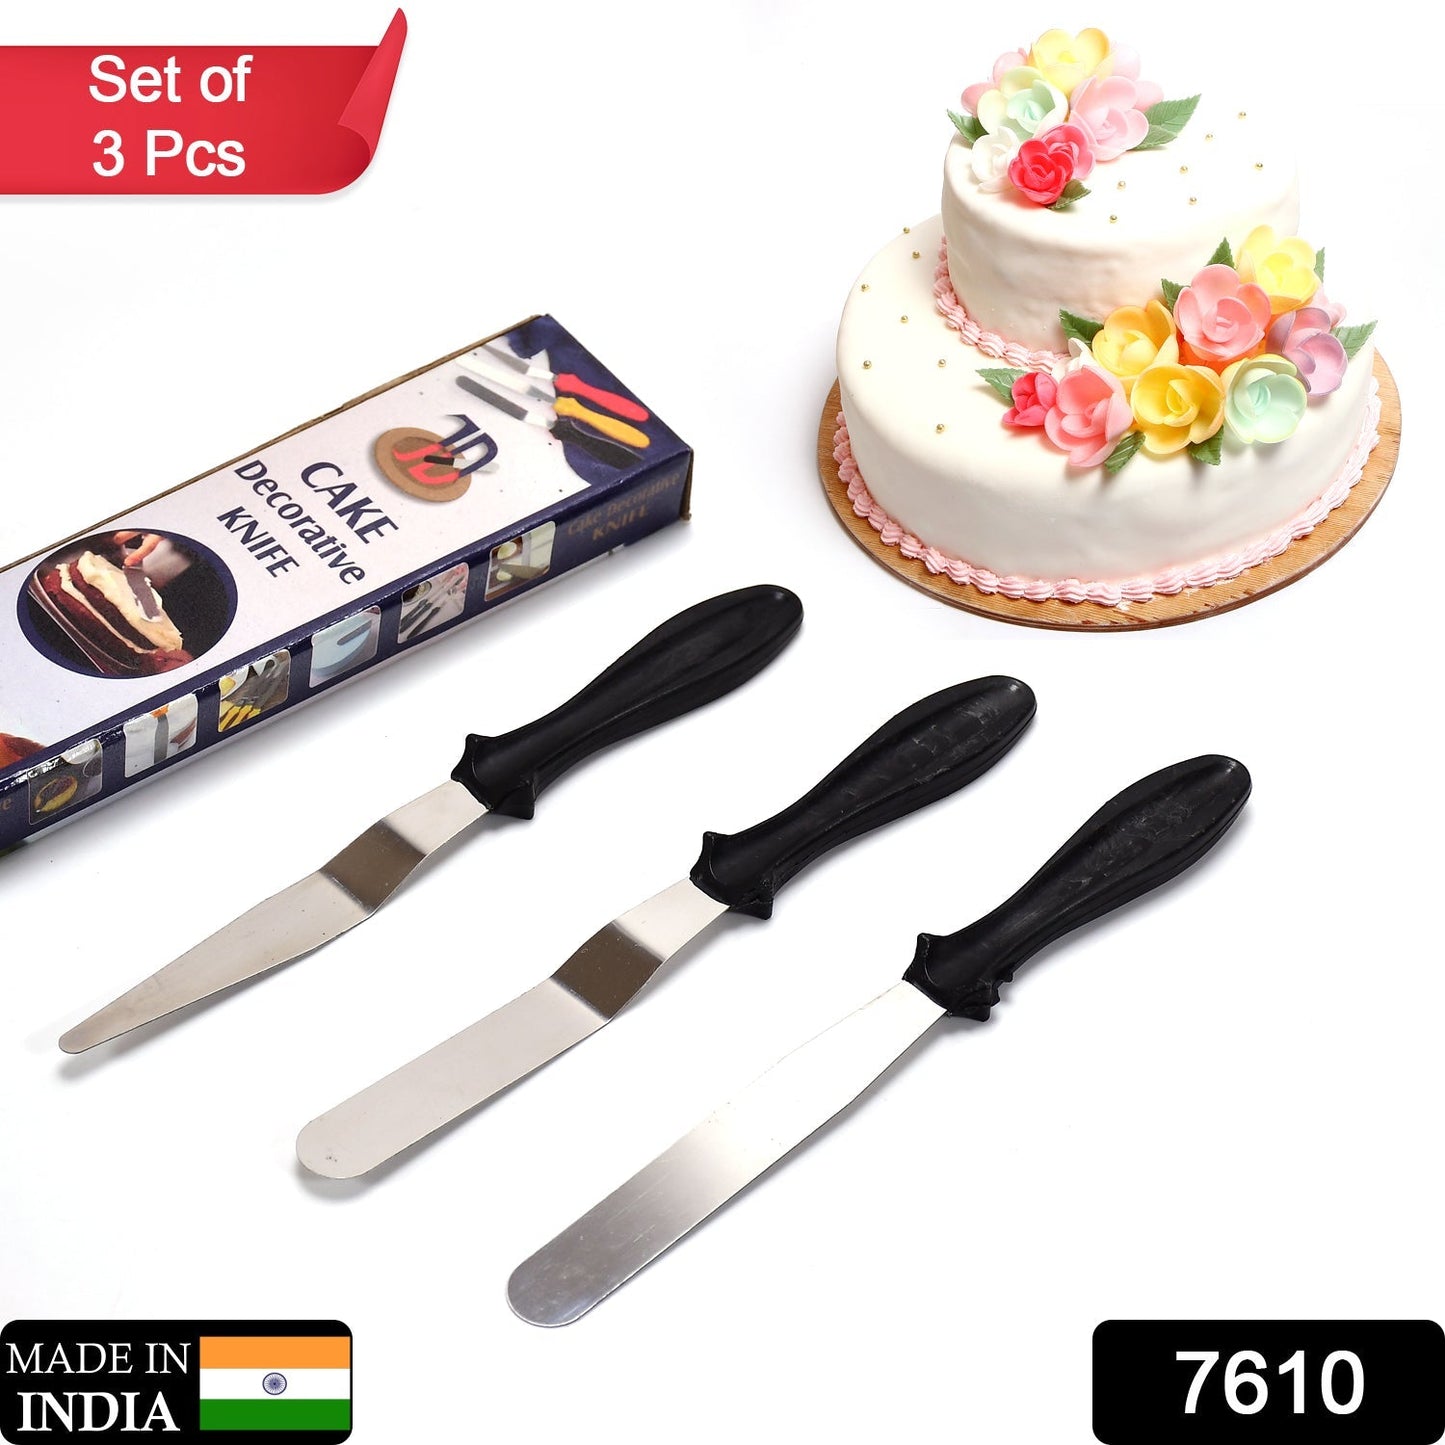 7610 3-in-1 Multi-Function Stainless Steel Cake Icing Spatula Knife Set 